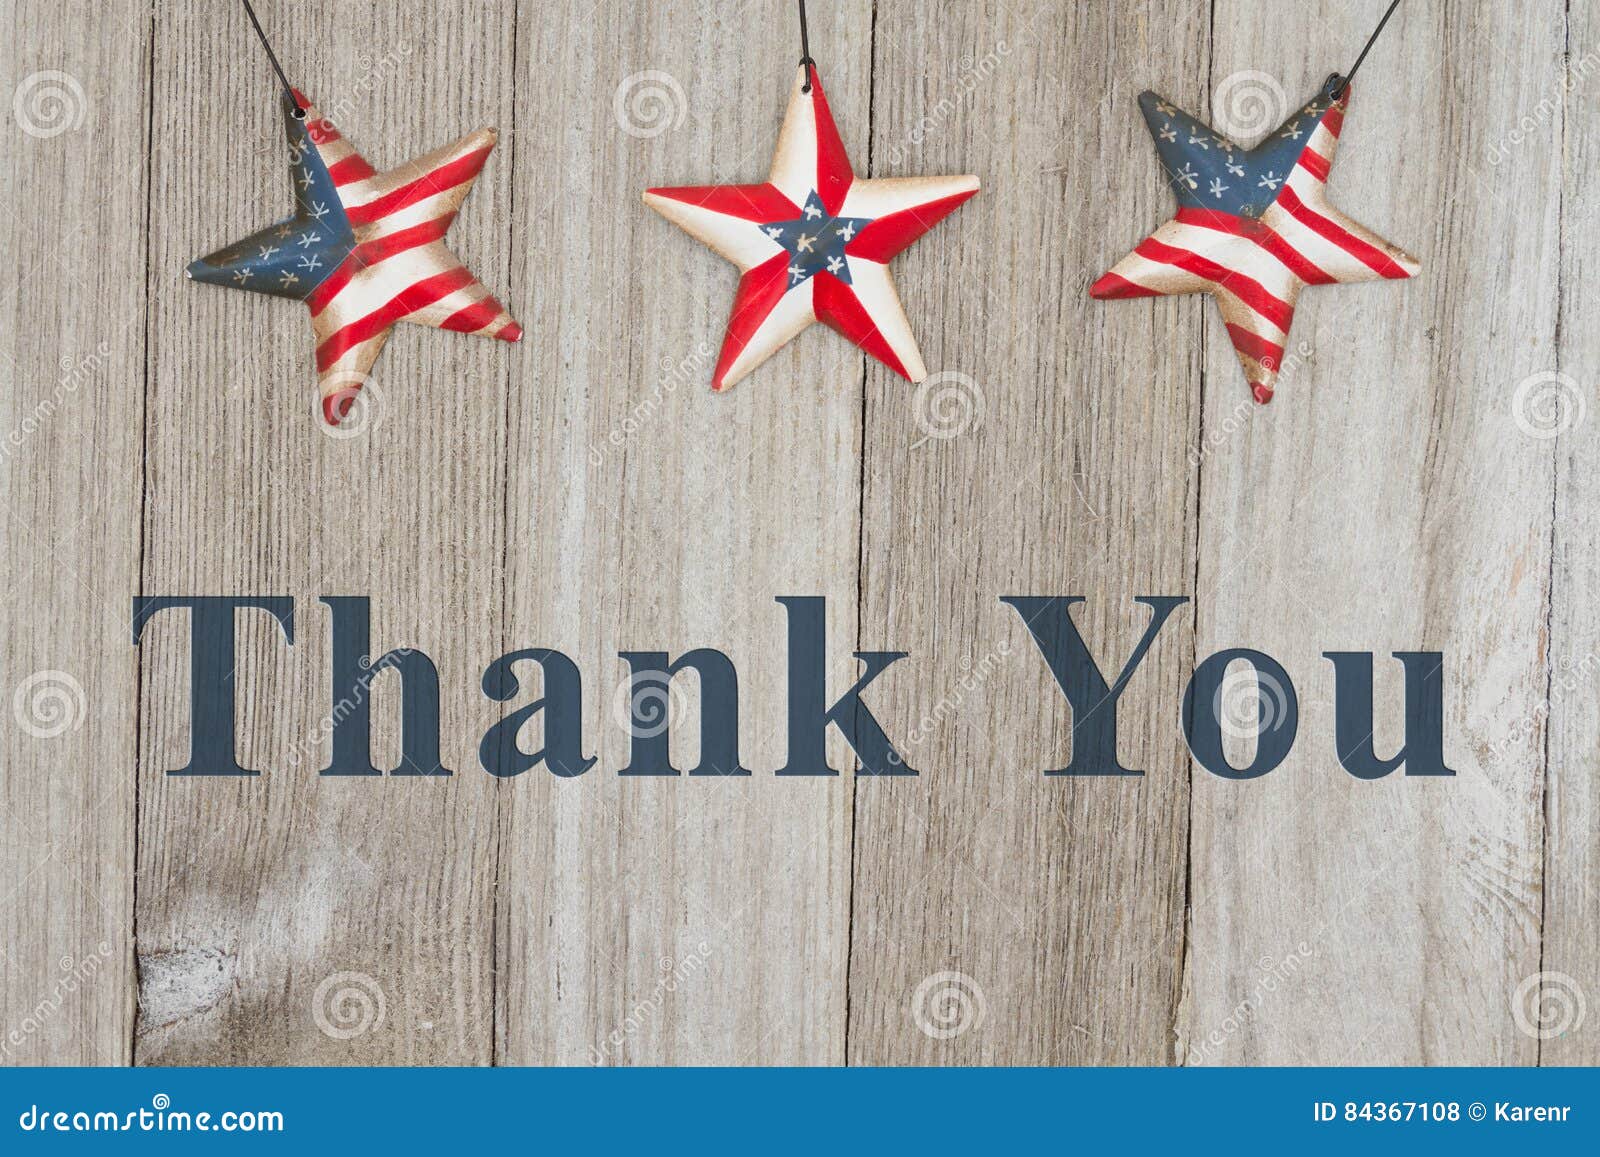 555 Patriotic Thank You Photos Free Royalty Free Stock Photos From Dreamstime